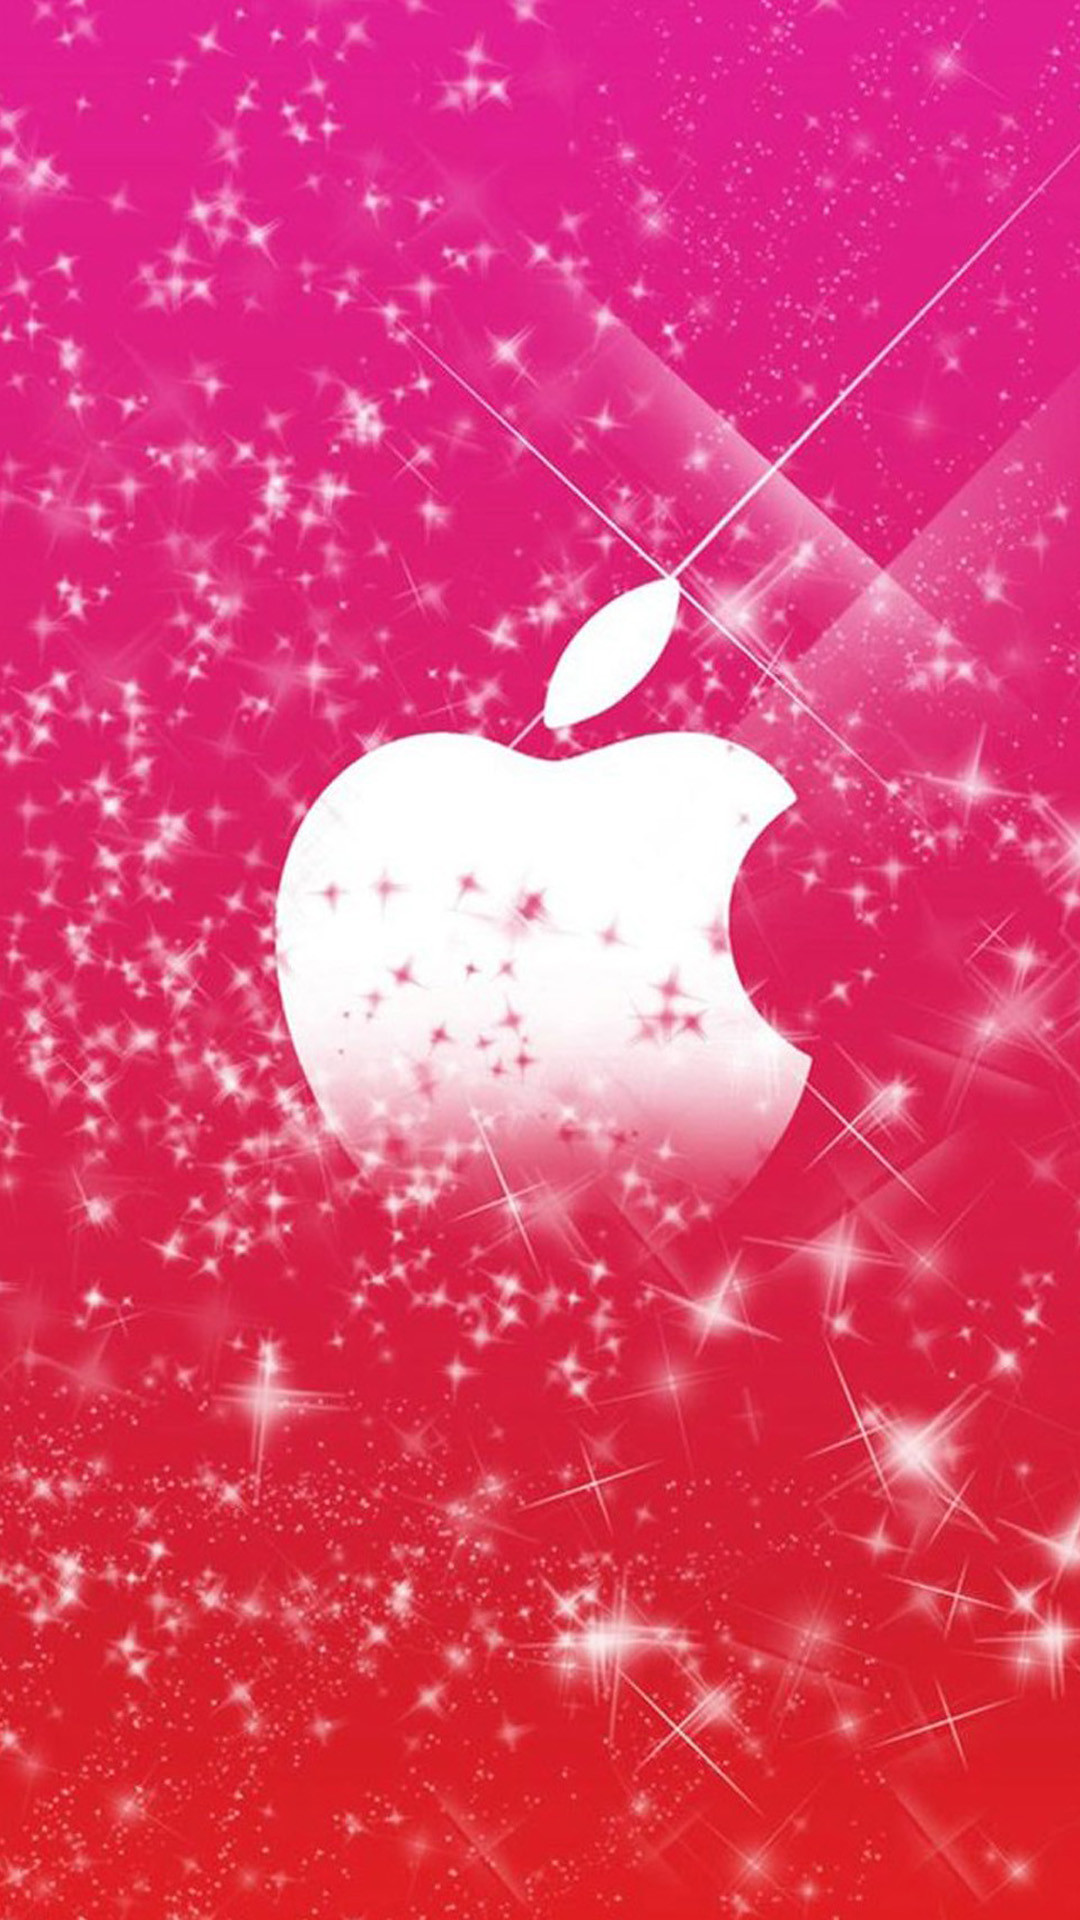 1080x1920 Pink Glitters iPhone Wallpaper and iPod touch Wallpaper